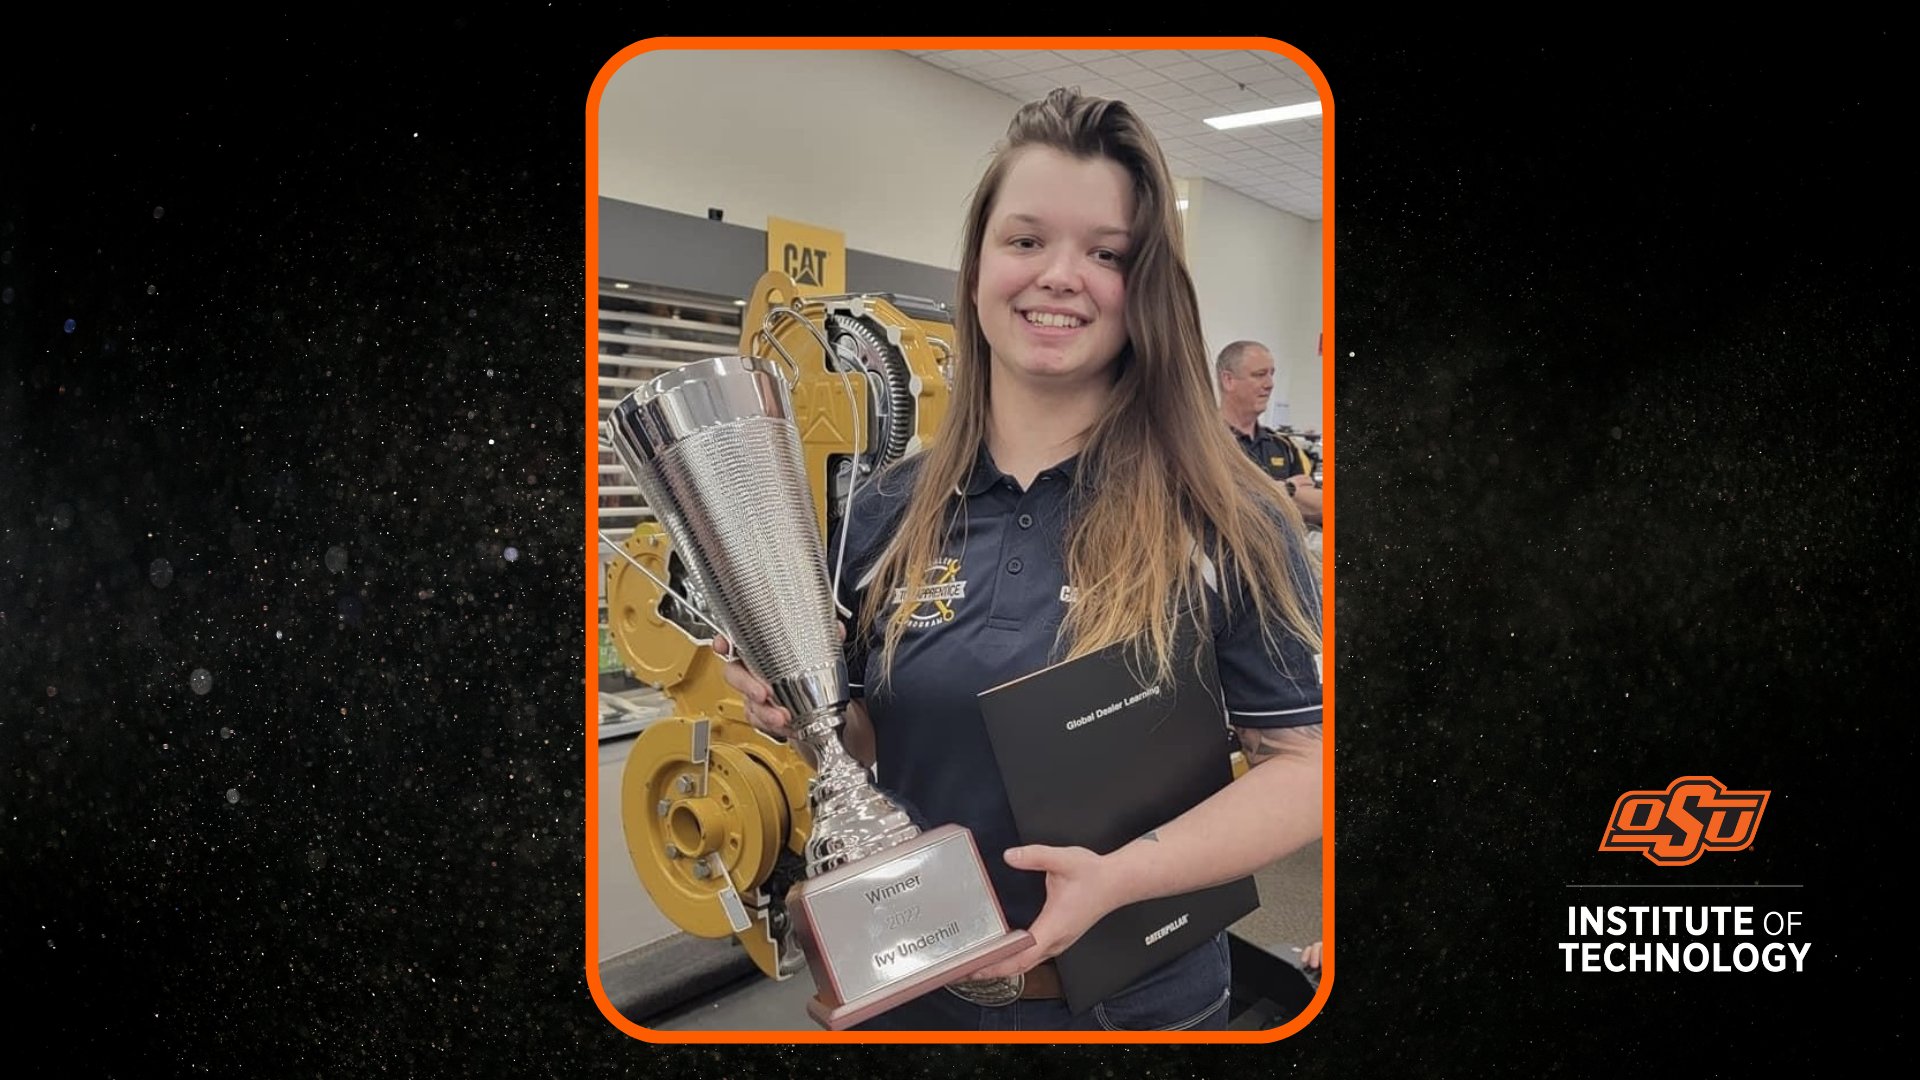 OSUIT Female Graduate Achieves Remarkable Success as Top Apprentice in Global CAT®  Competition